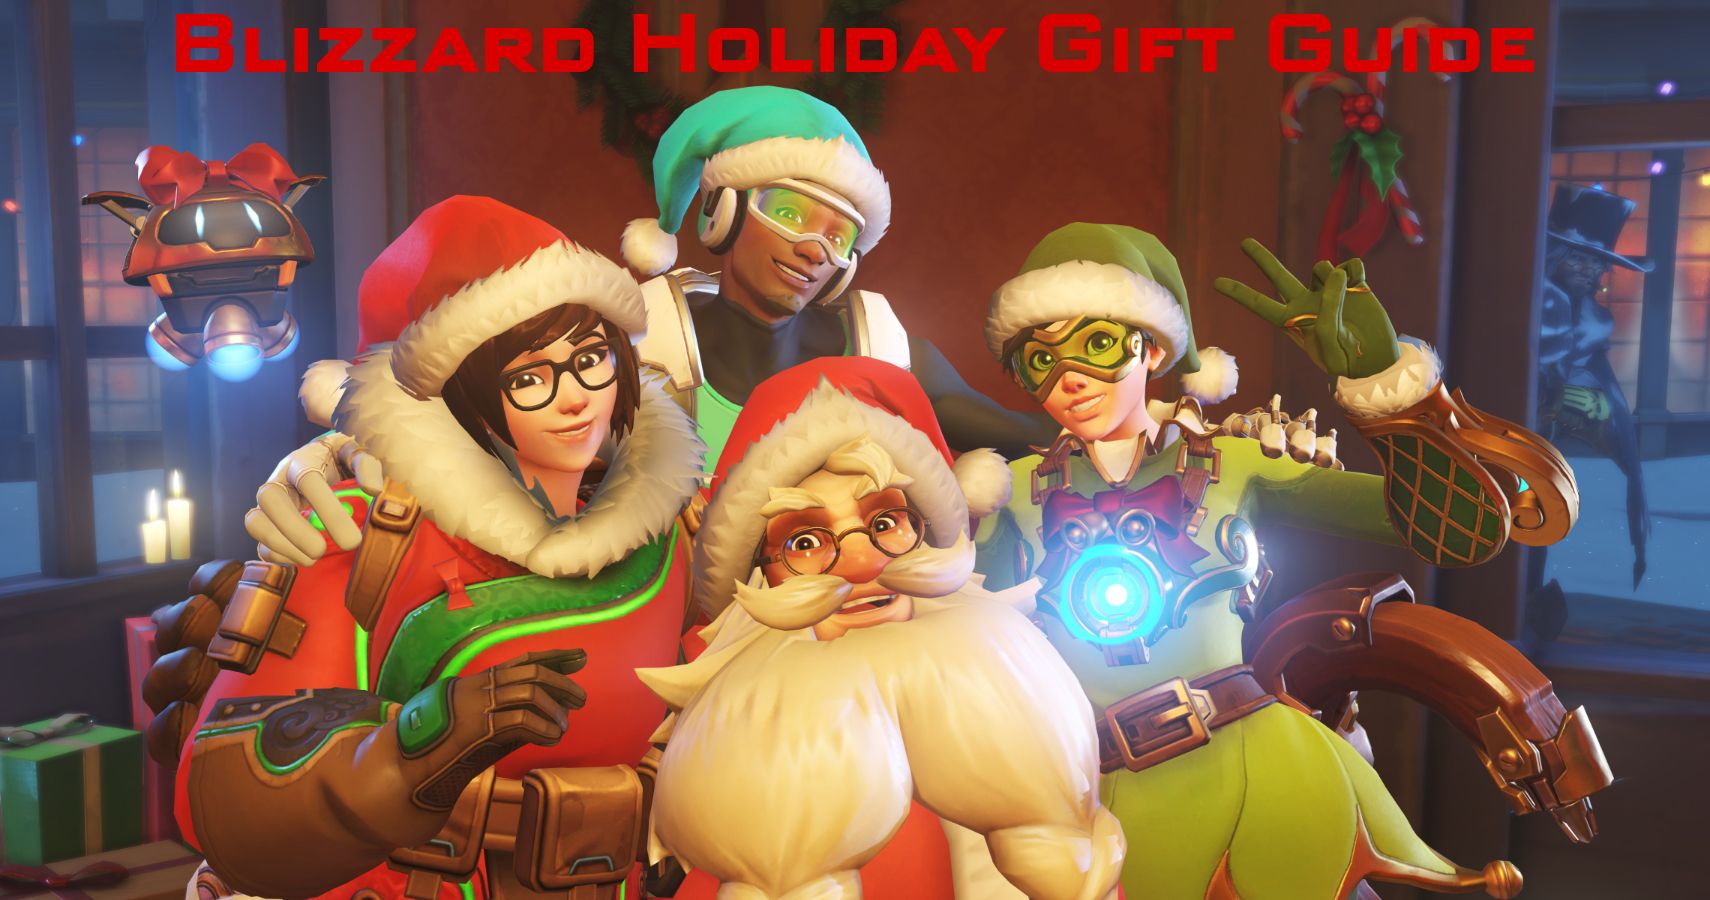 TheGamers Blizzard Holiday Gift Guide